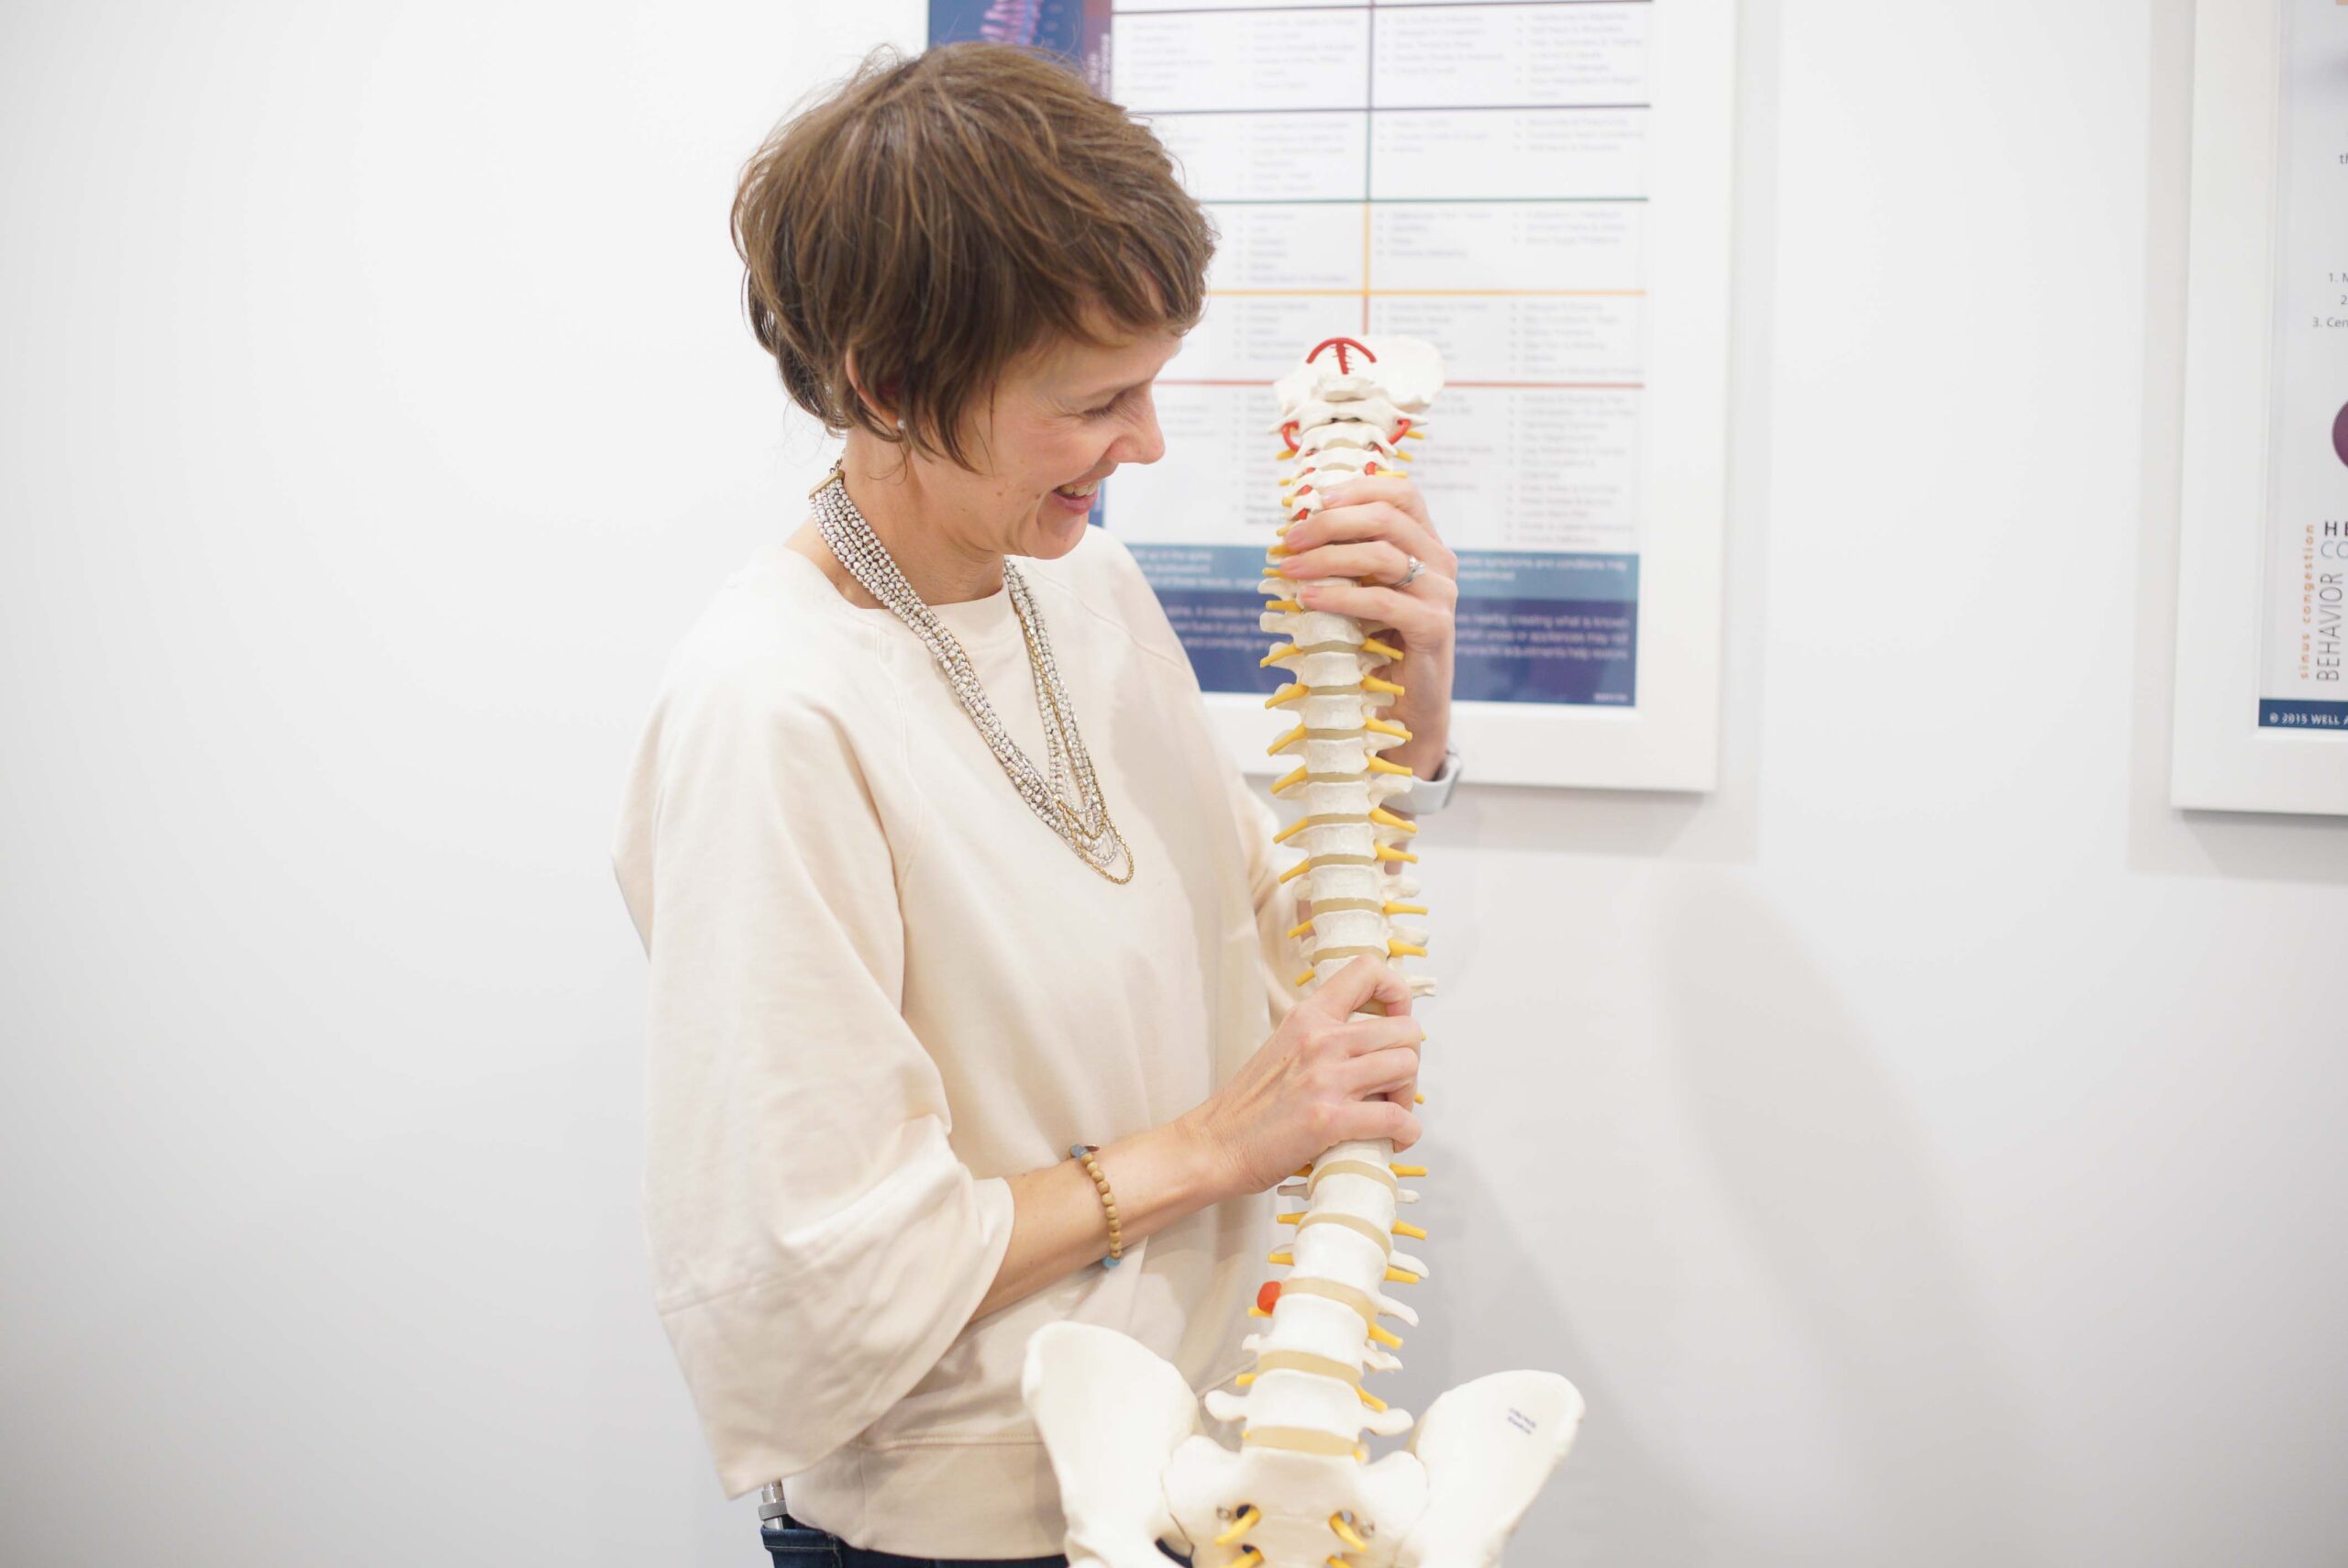 Dr. Ange Wellman with spine anatomical model